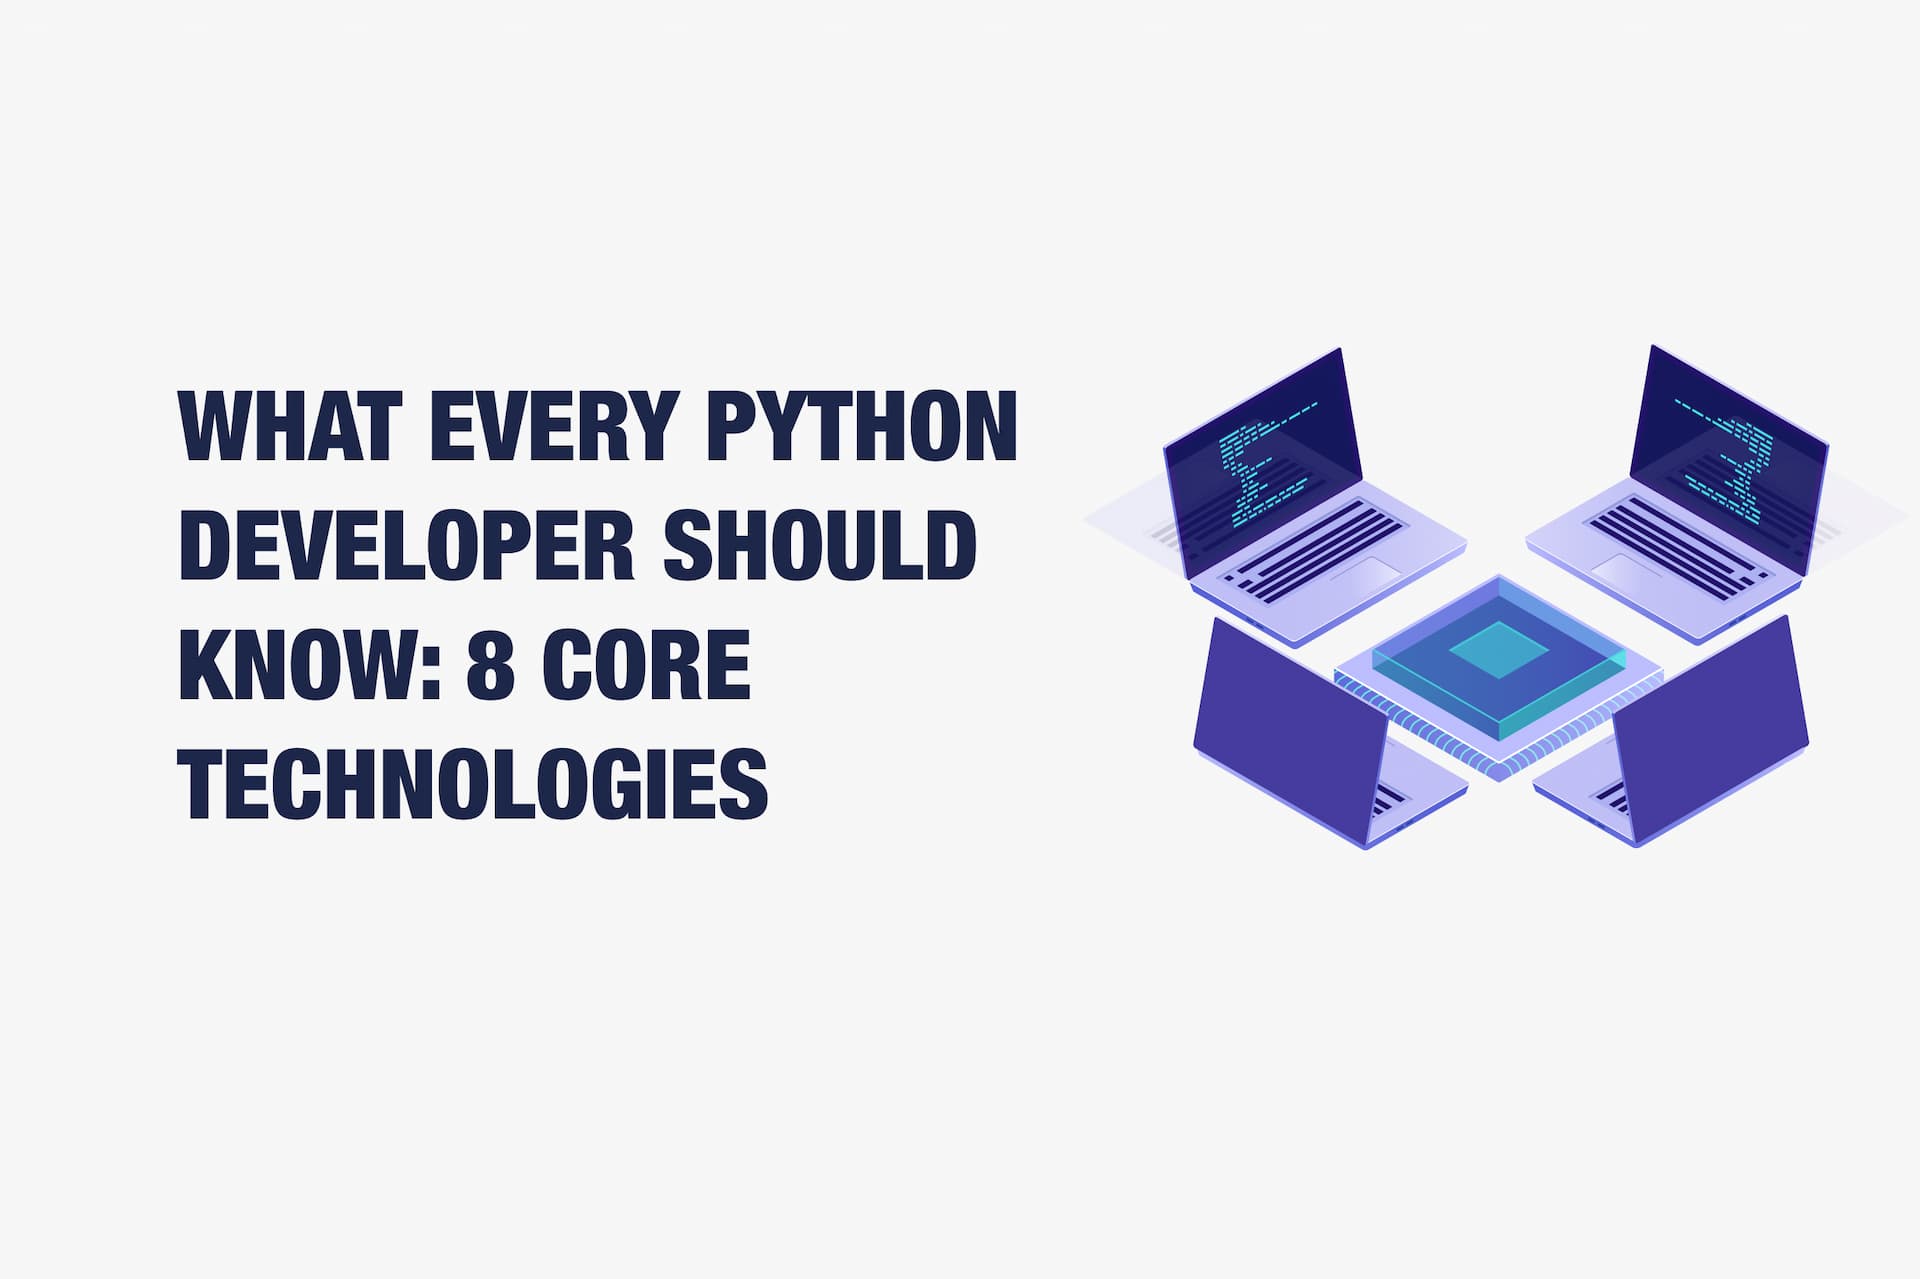 What Every Python Developer Should Know: 8 Core Technologies